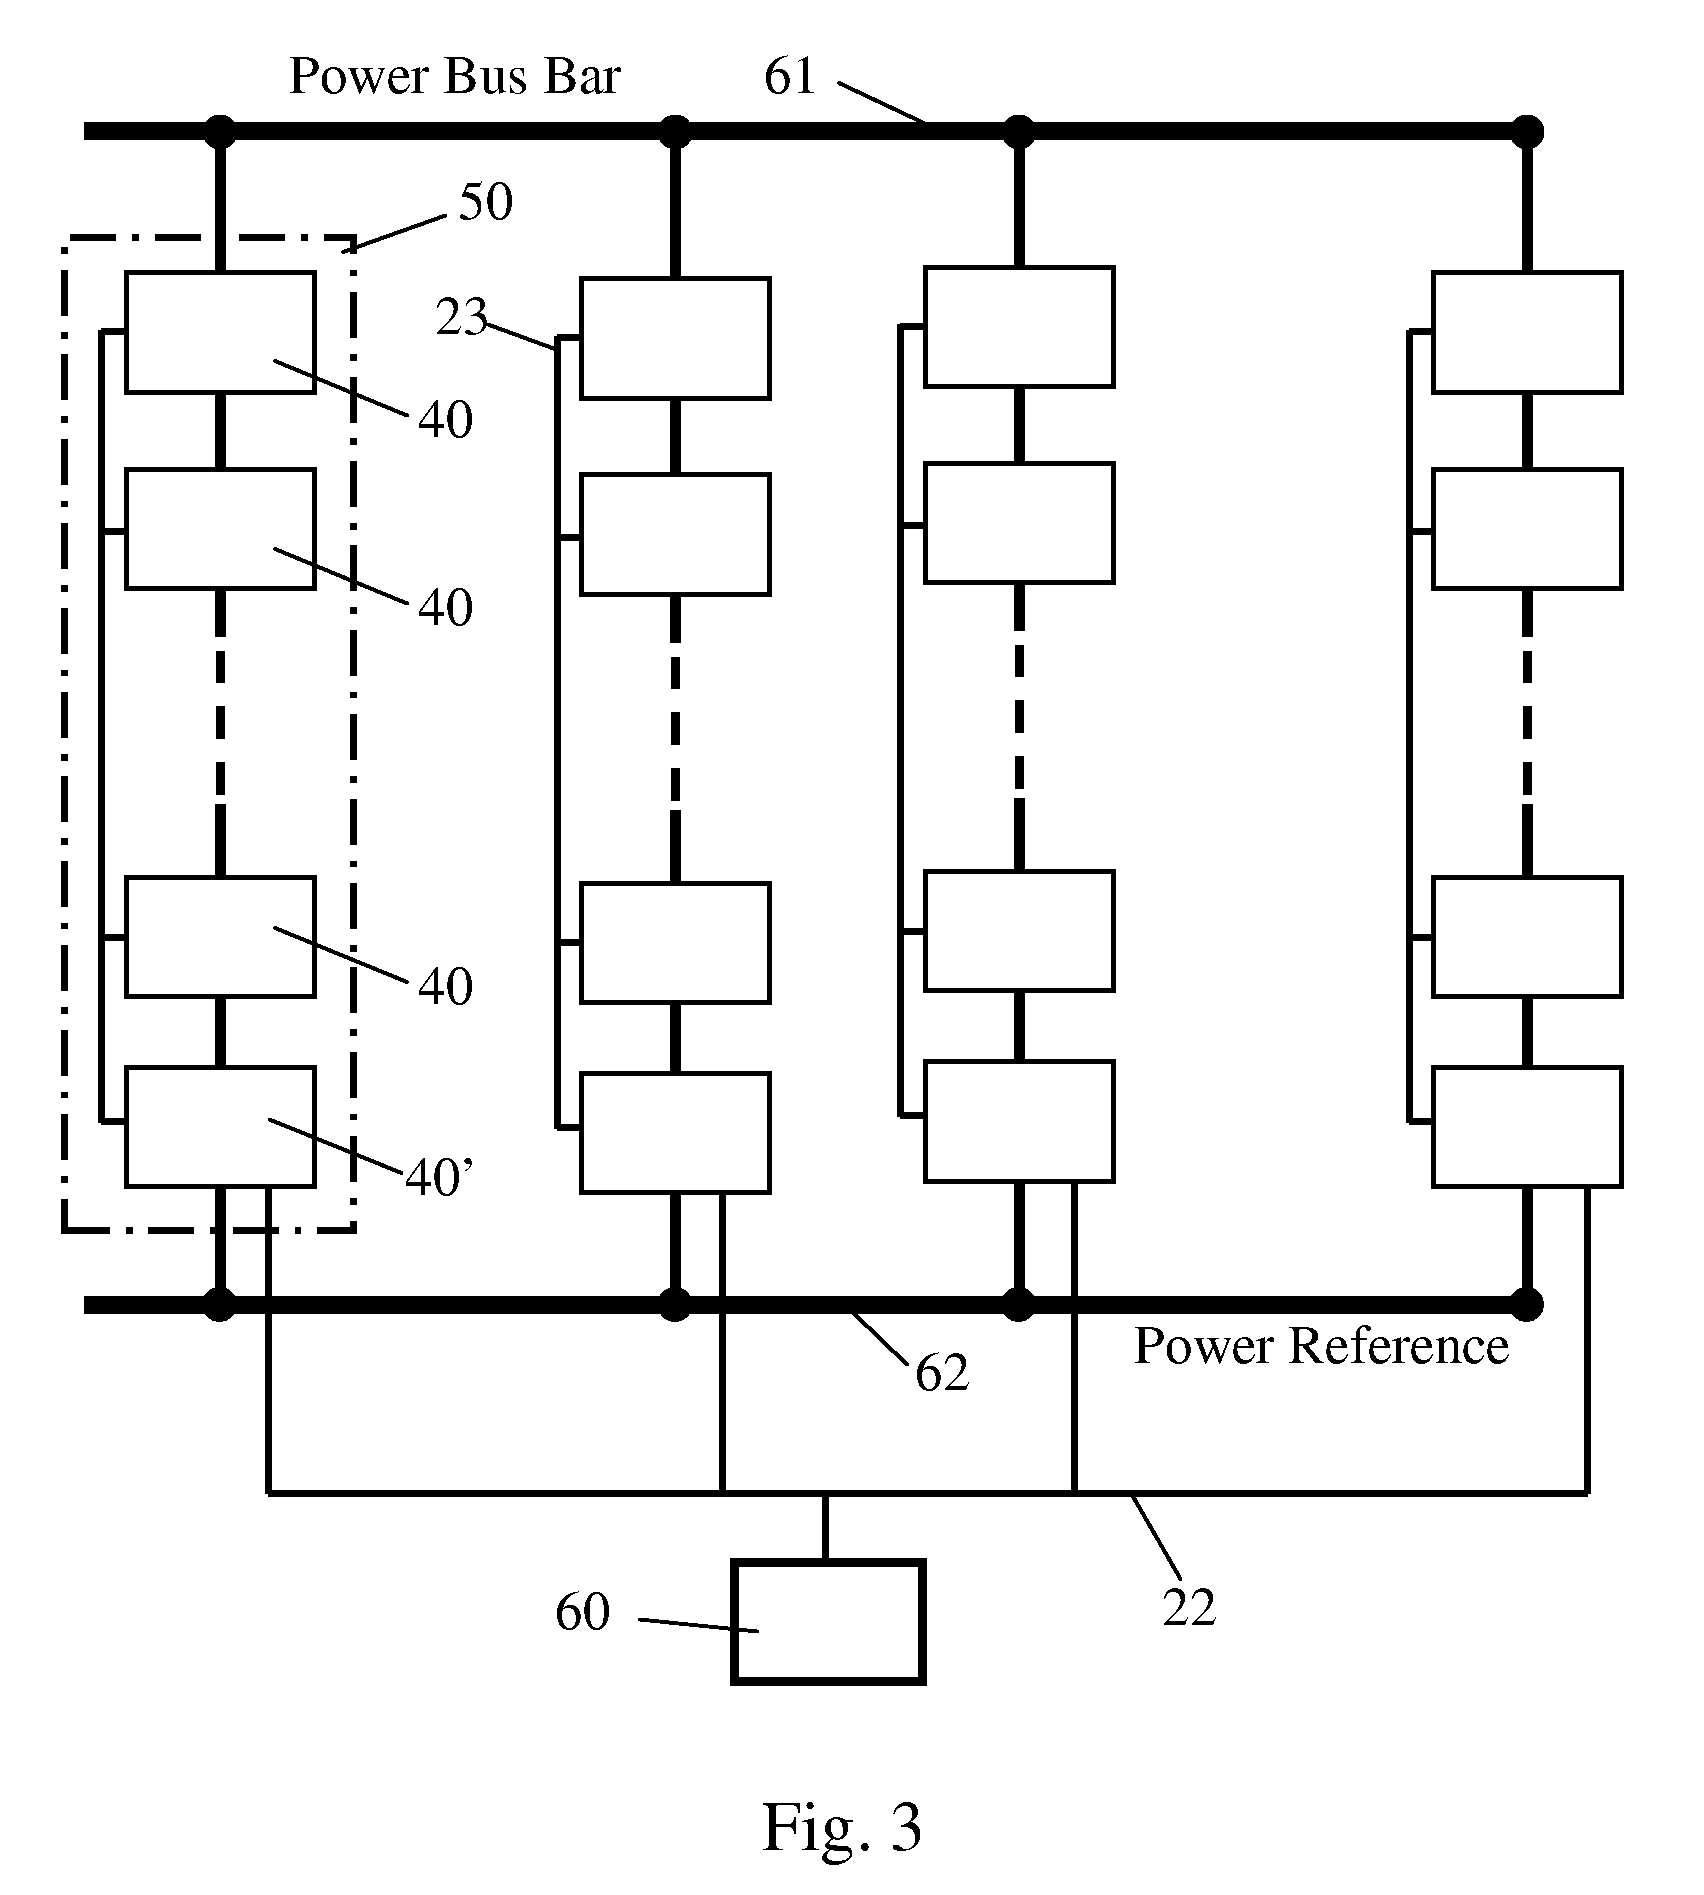 Distributed energy storage control system